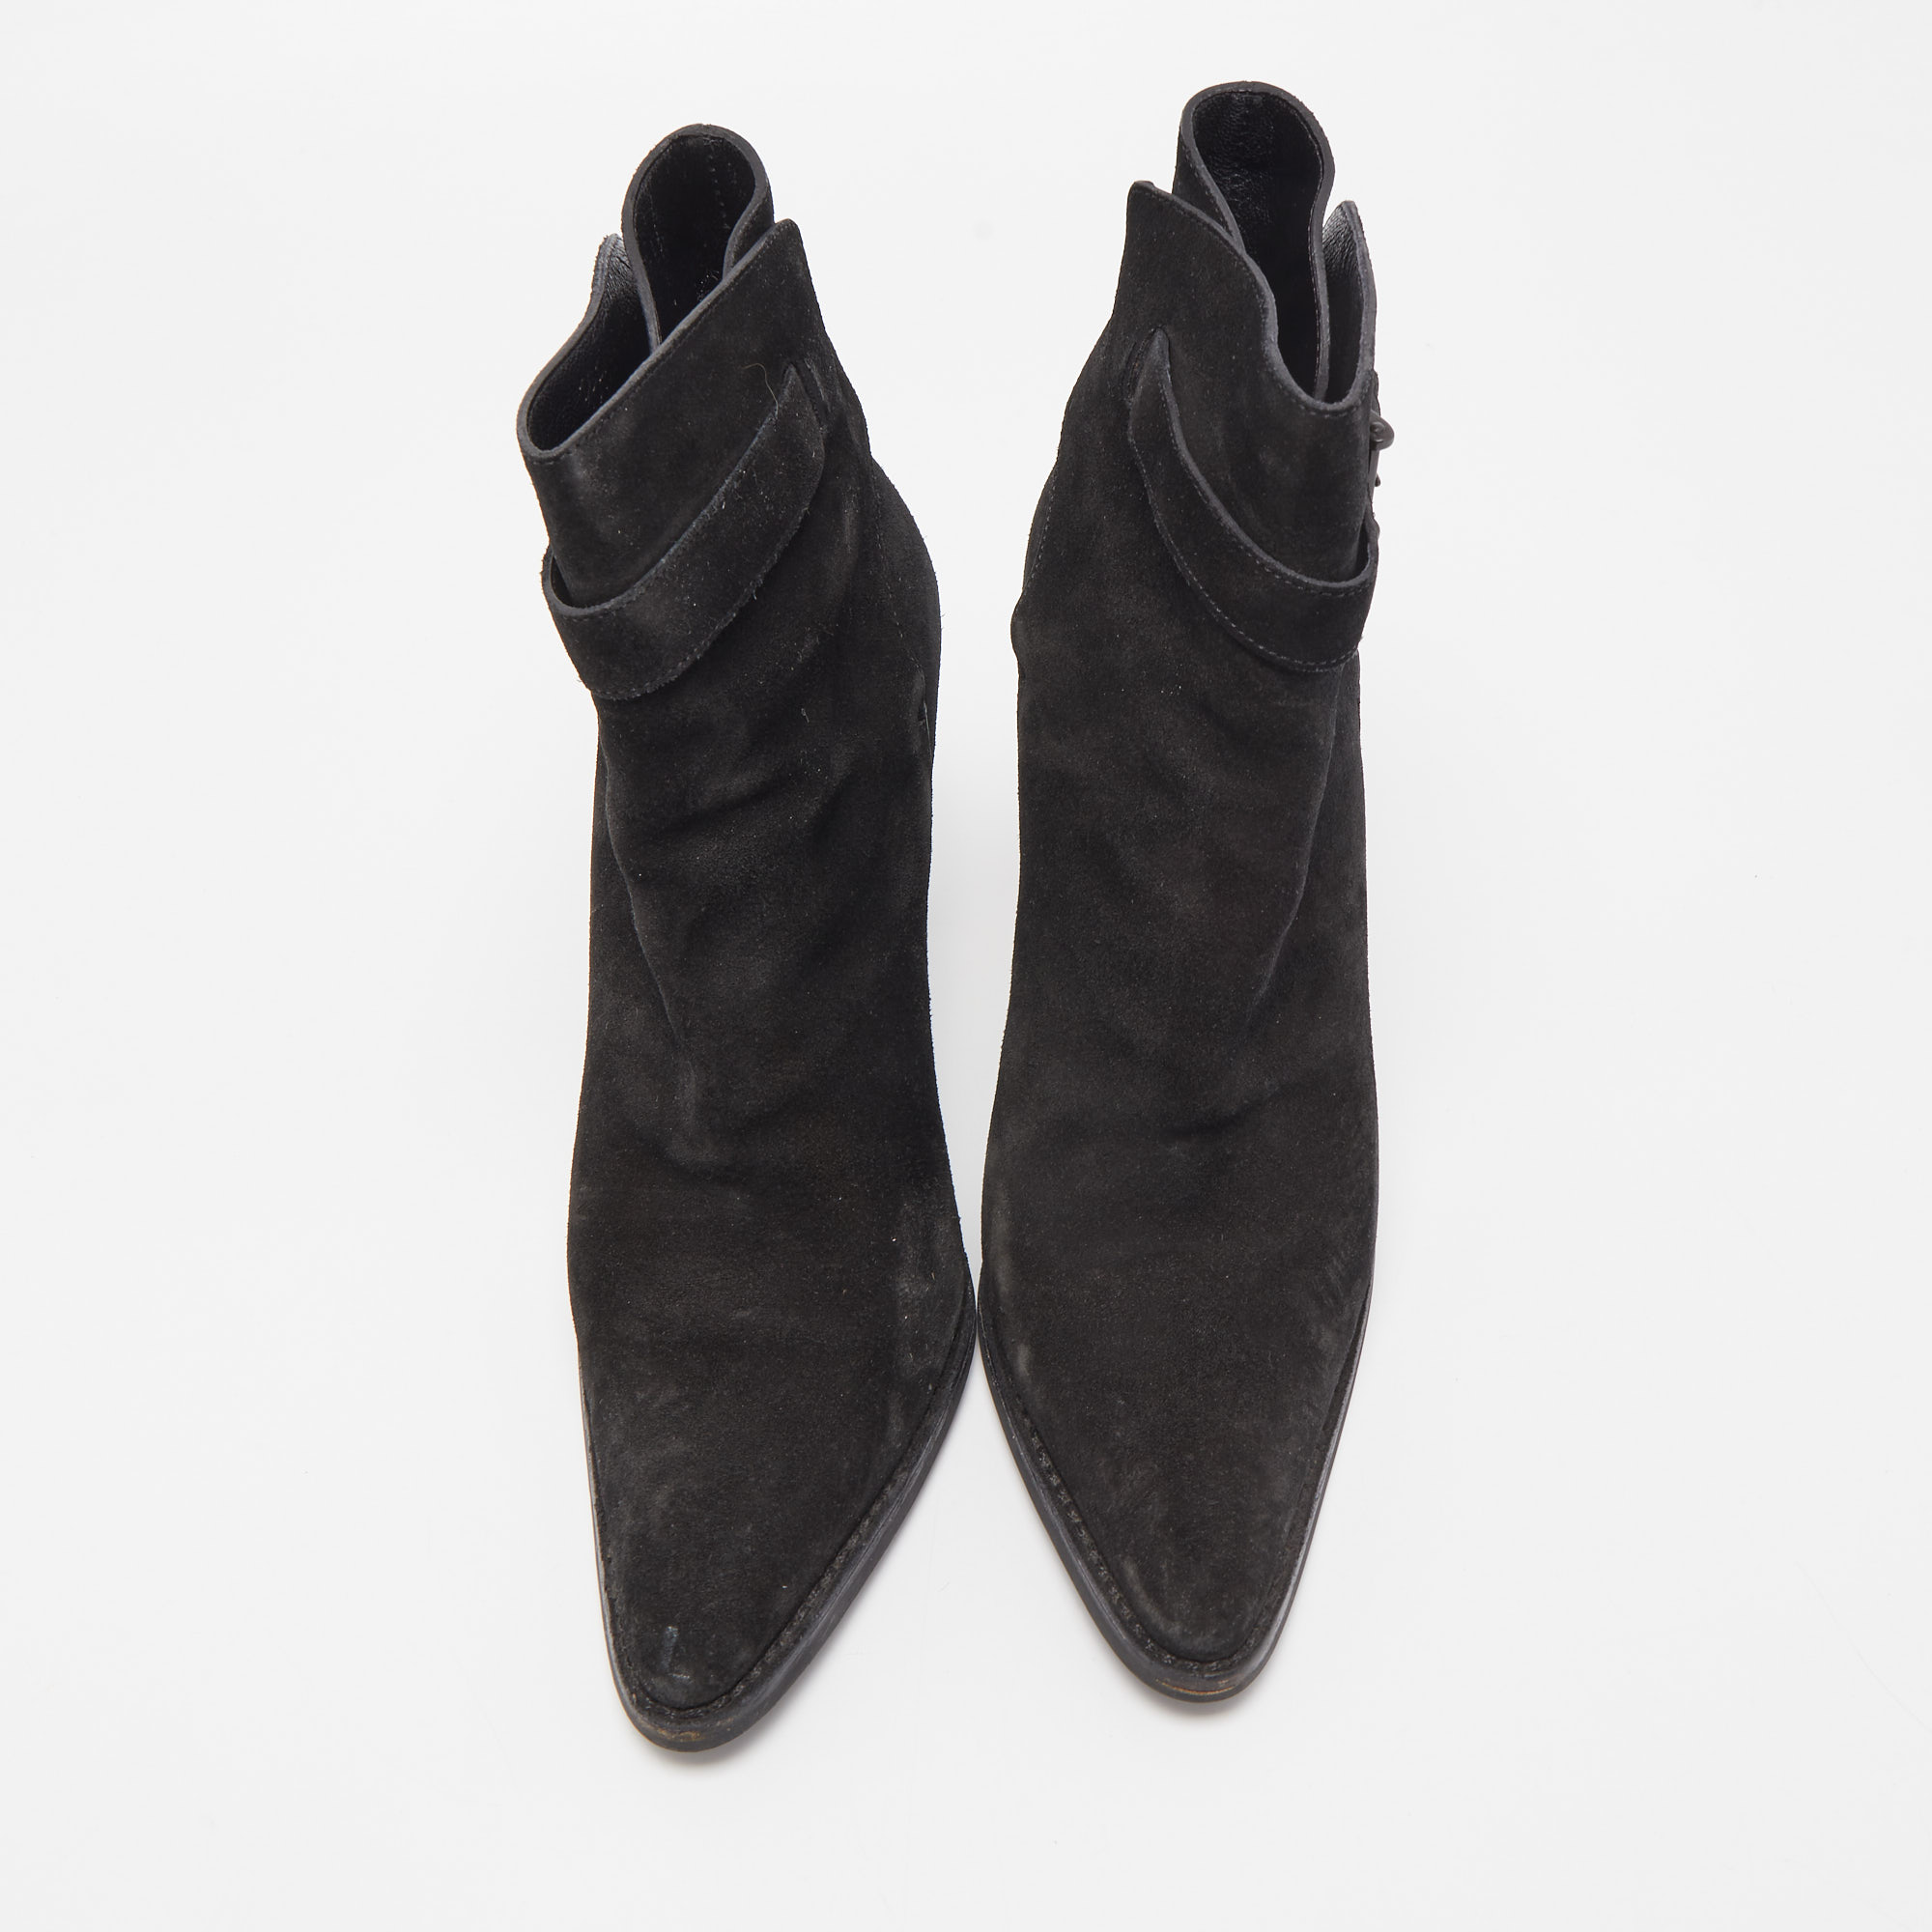 Gucci Black Suede Pointed Toe Ankle Boots Size 39